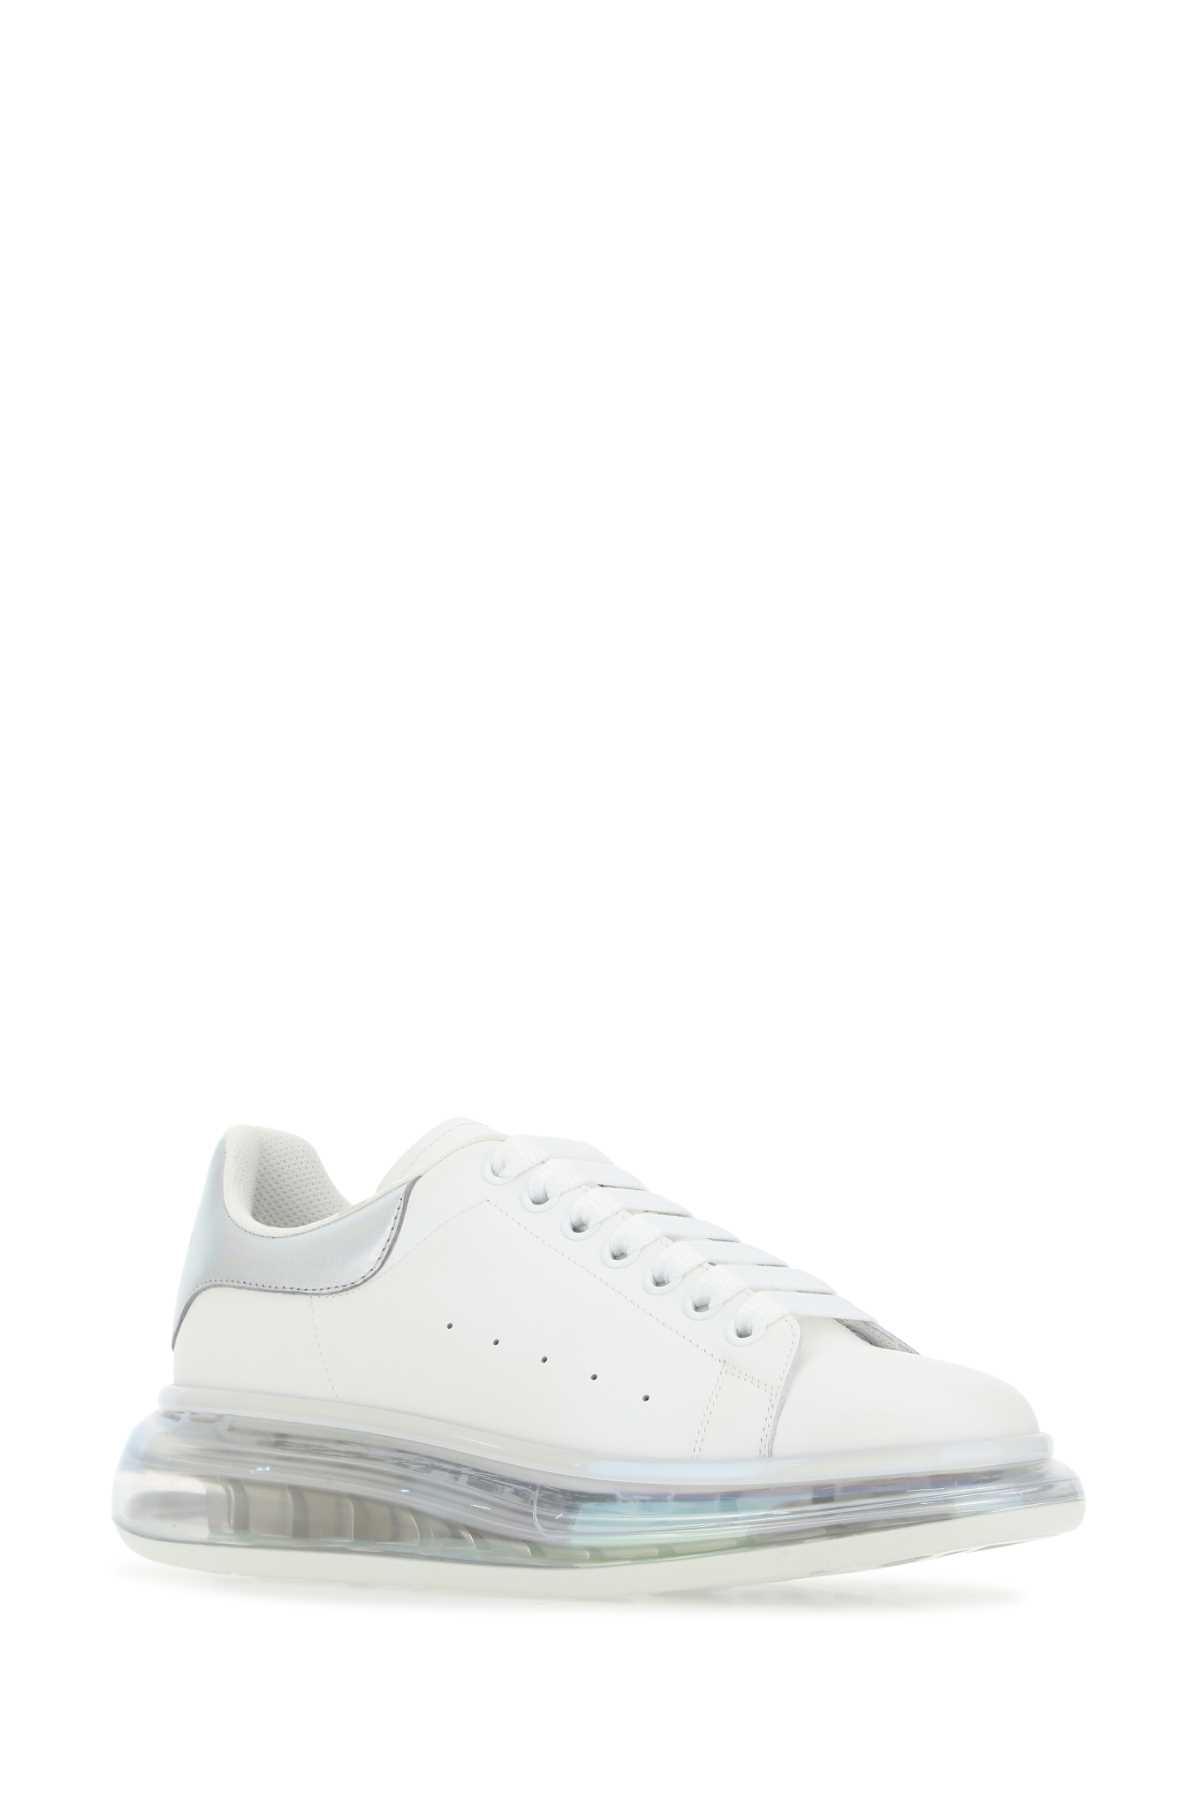 Alexander Mcqueen White Leather Sneakers With Silver Leather Heel In 9637